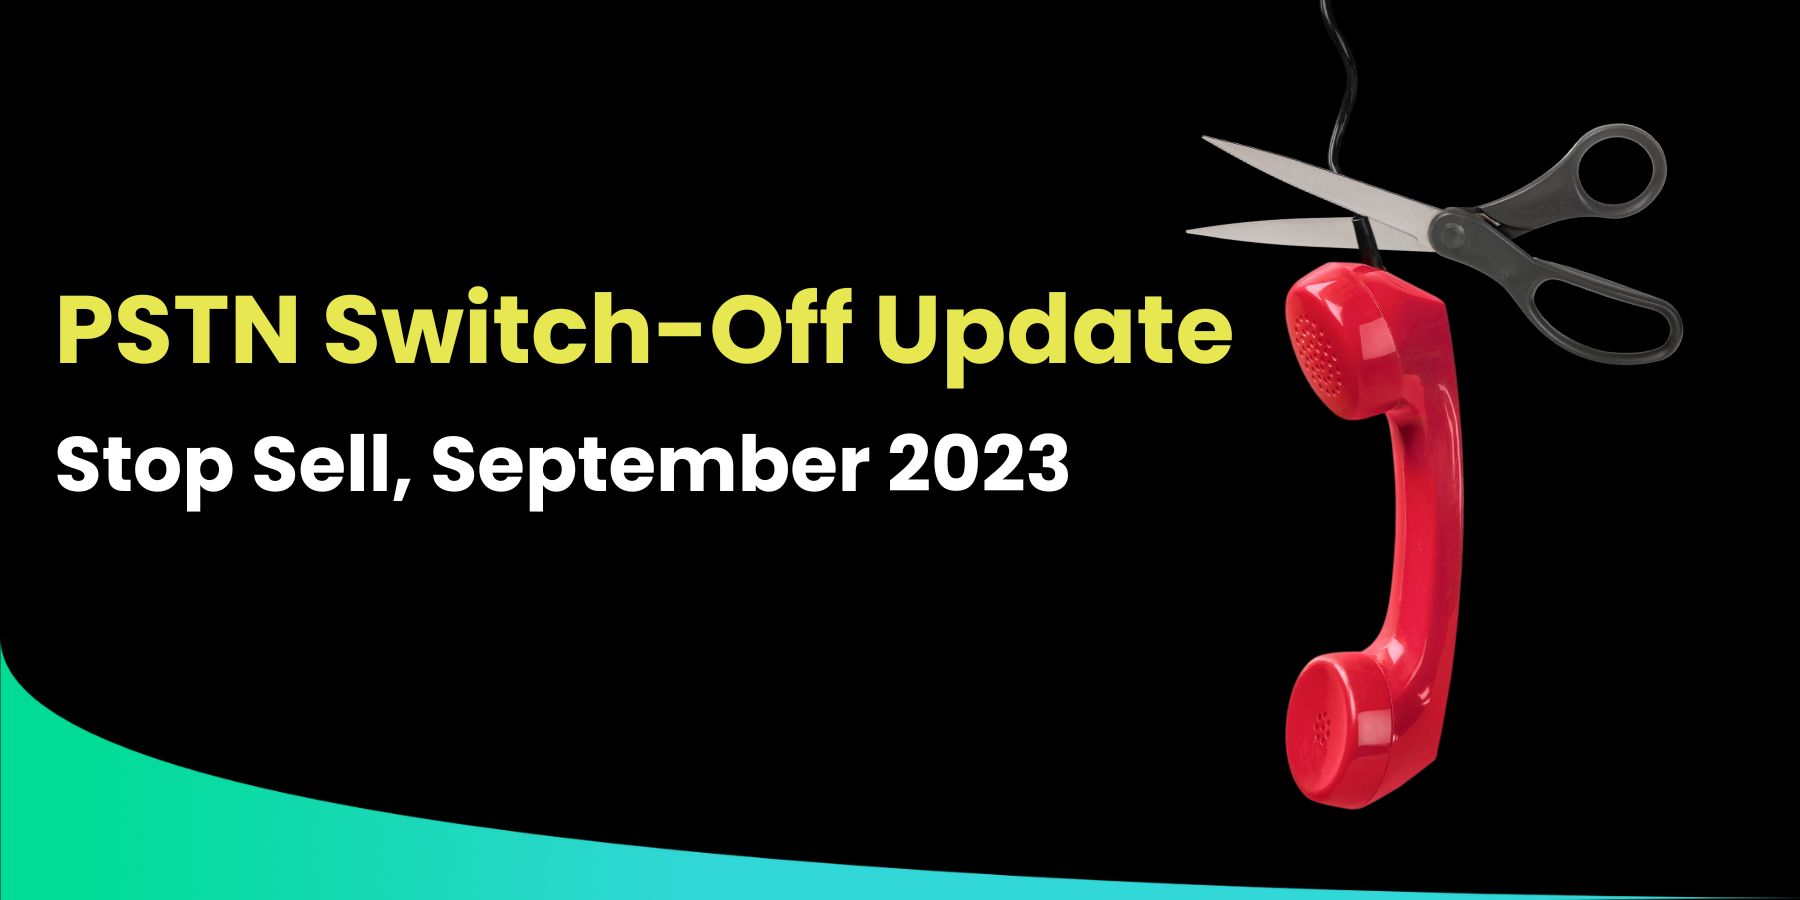 Featured image for “PSTN Switch-Off Update: Stop Sell, Sept. 2023”